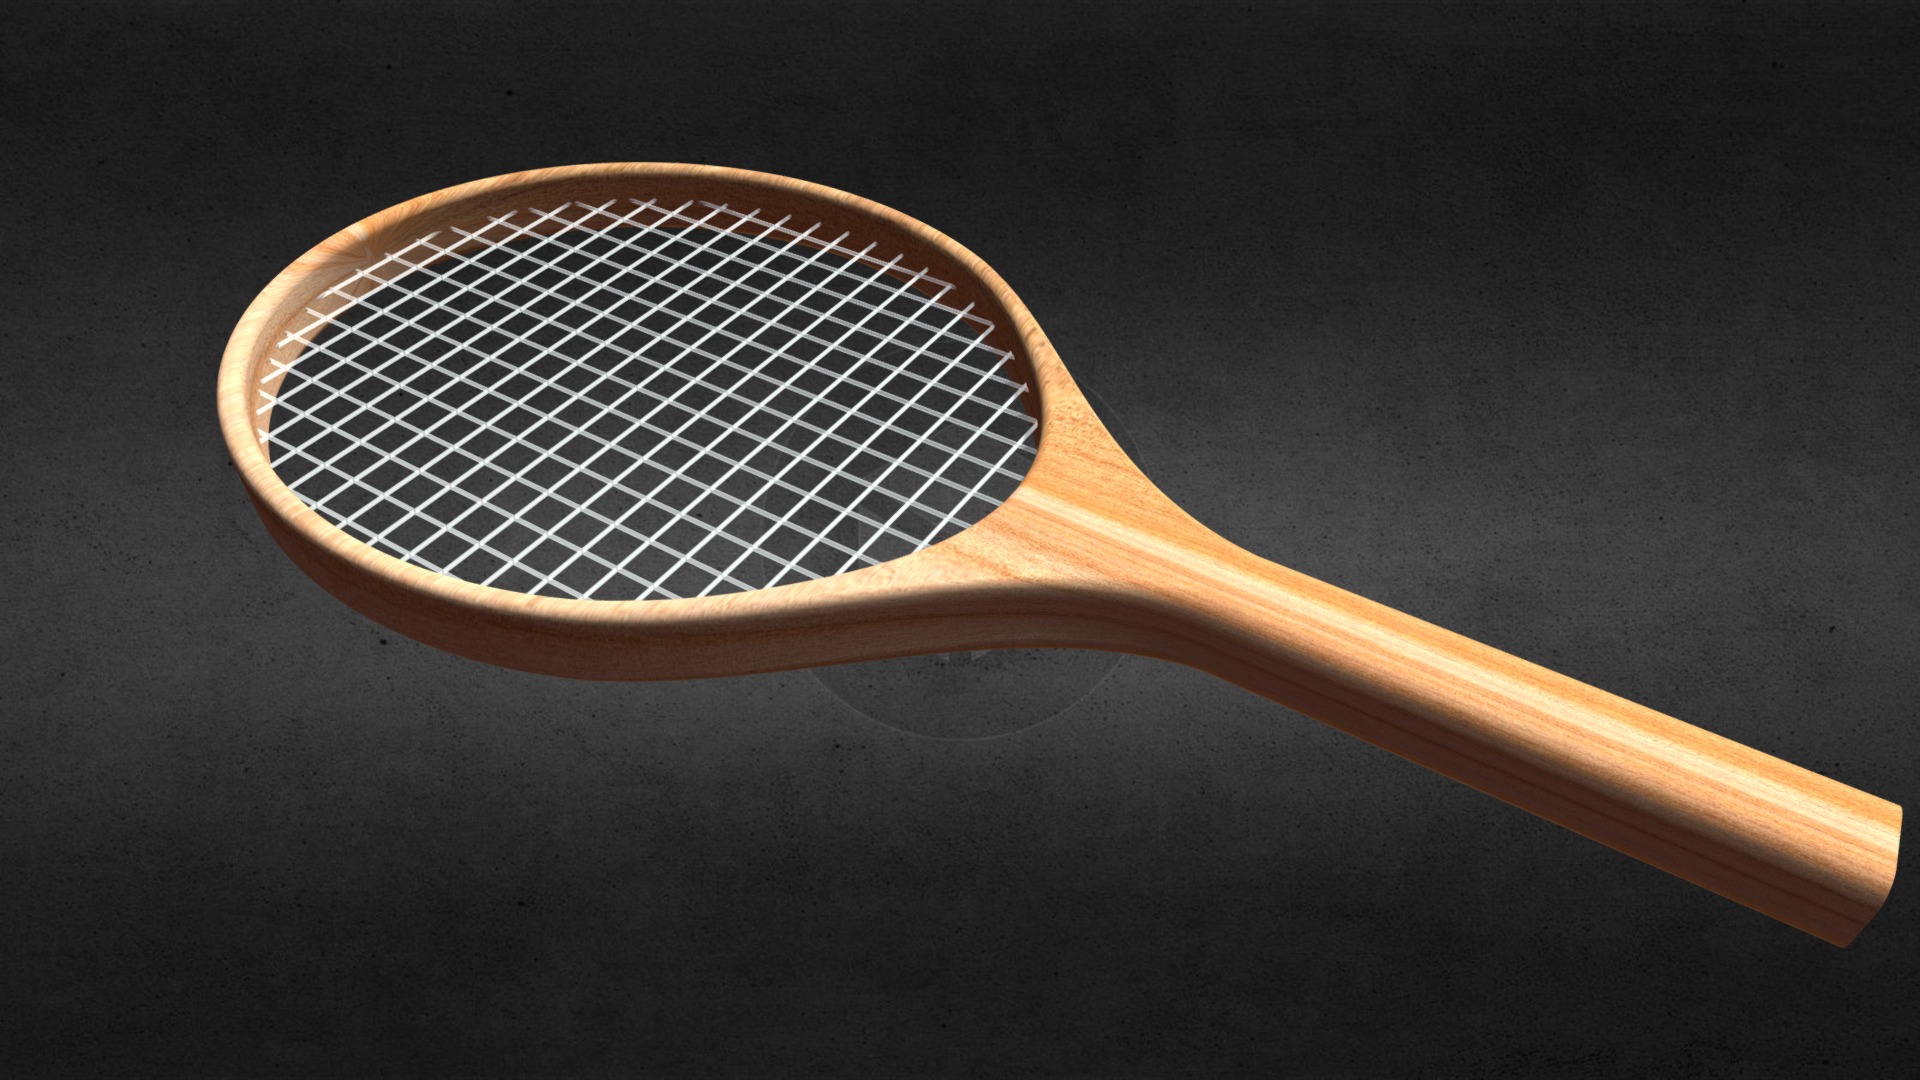 3D model Racket - This is a 3D model of the Racket. The 3D model is about a wooden tennis racket.